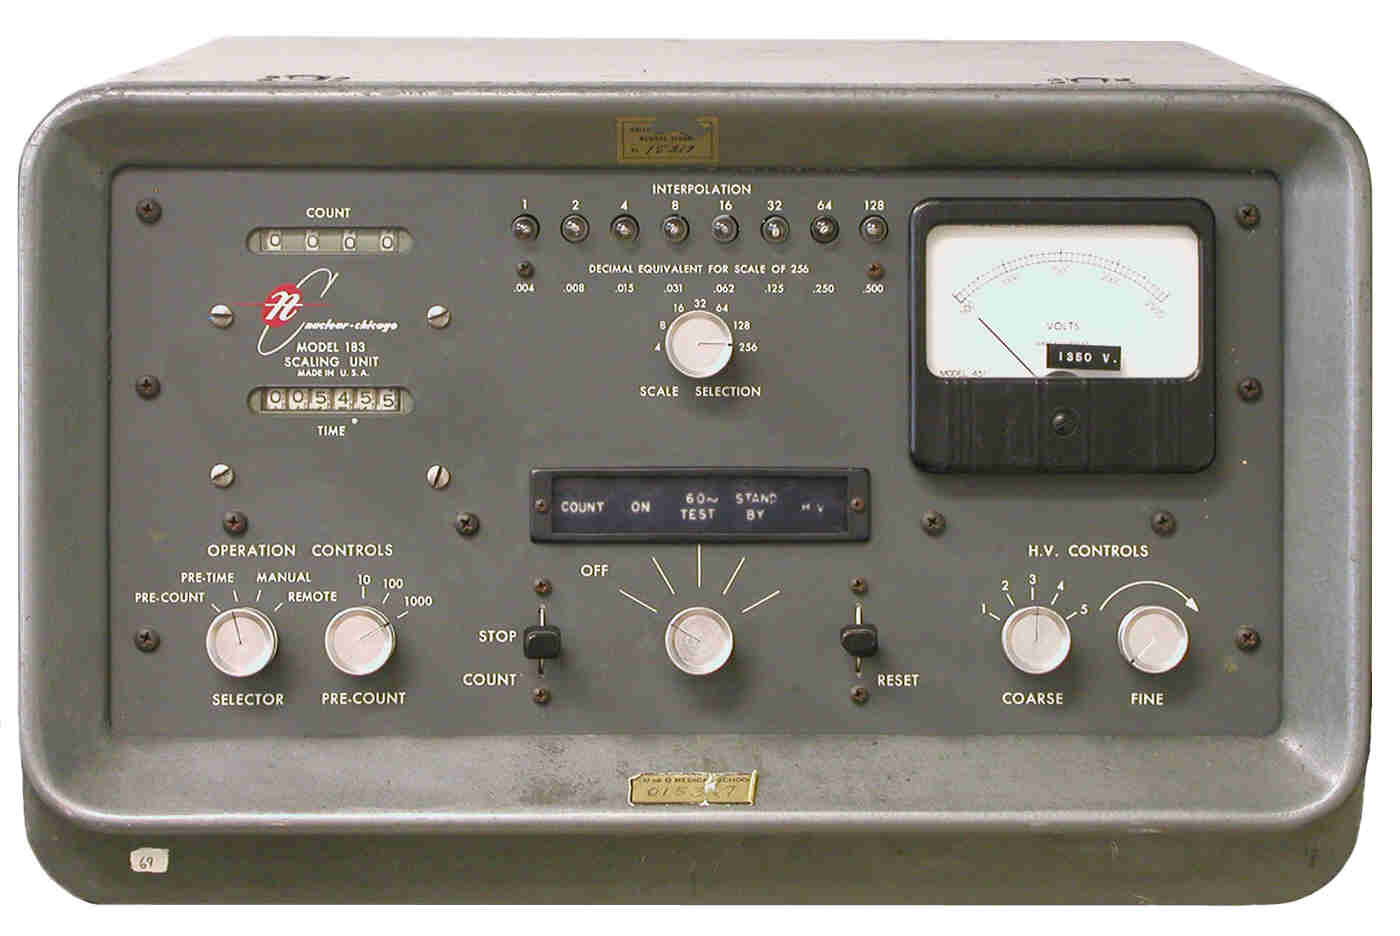 Nuclear-Chicago "Count-O-Matic" Model 183 Binary Scaler